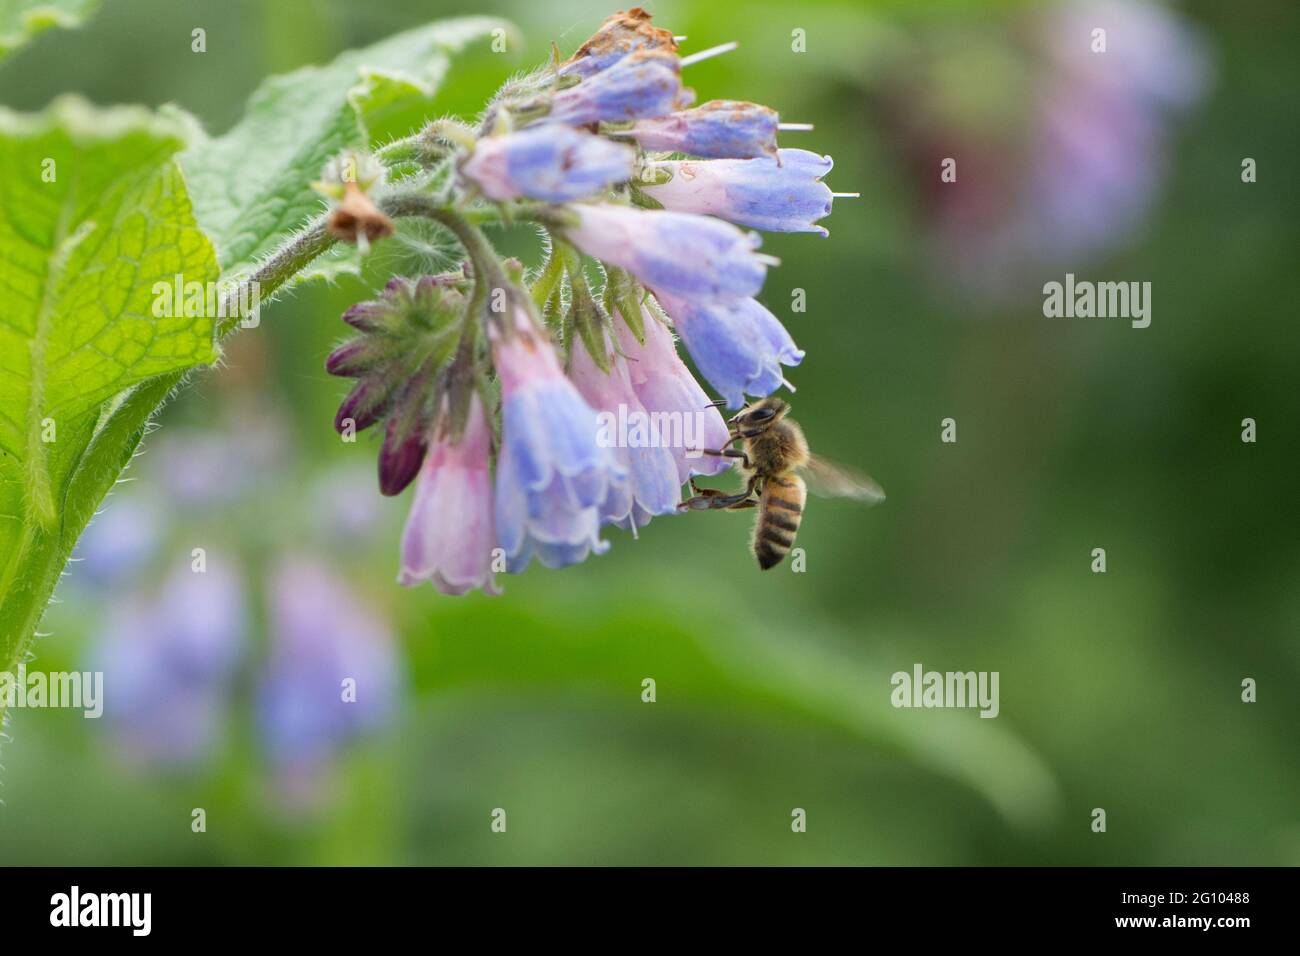 bee feeding on Symphytum officinale, Comfrey, close-up of flowers and leaves, May, UK Stock Photo